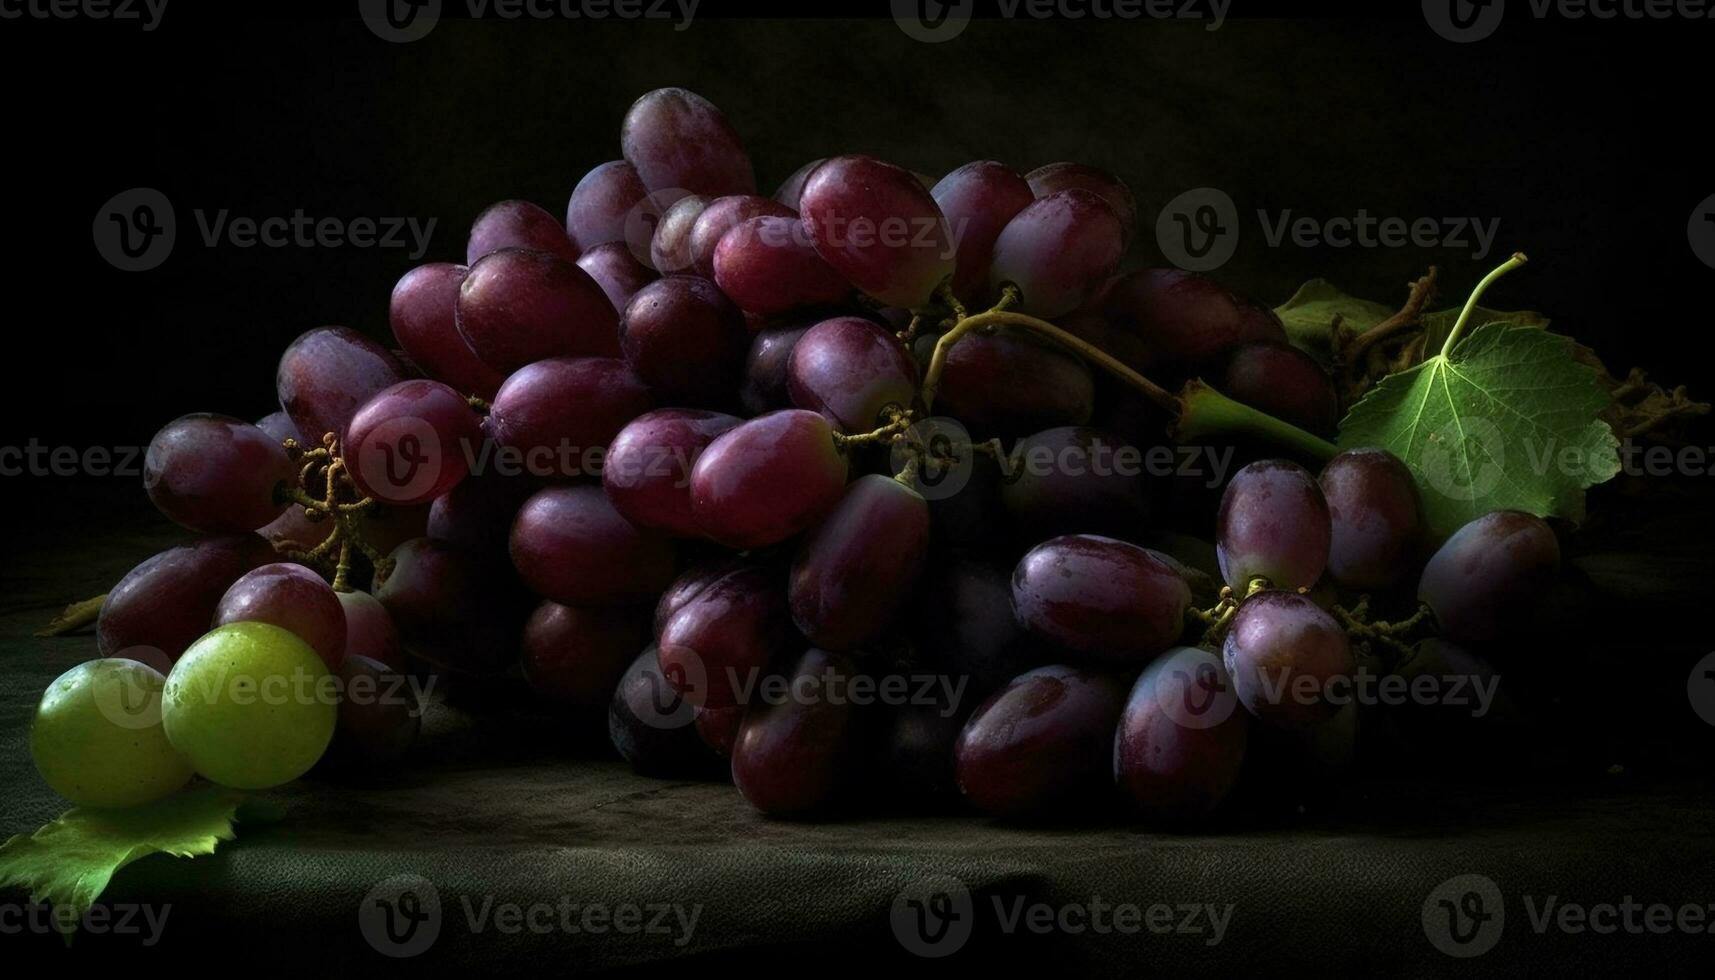 Fresh grape bunches on a wooden table, a healthy autumn snack generated by AI photo